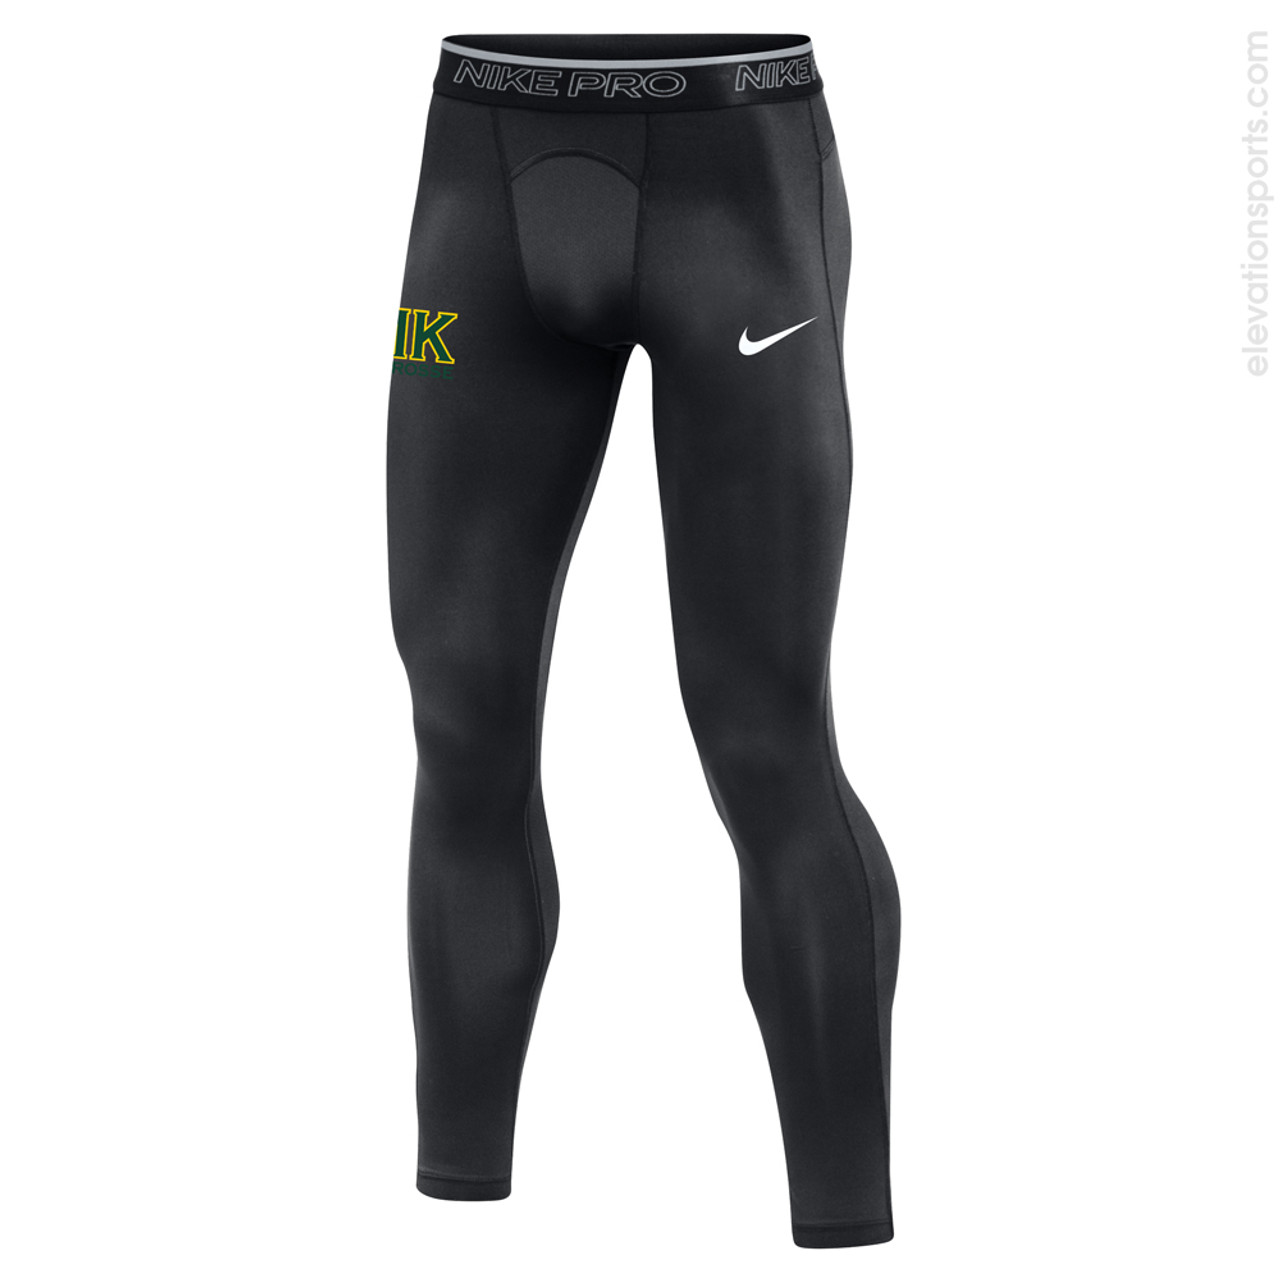 Nike Men's Pro Therma Compression Tights | Dick's Sporting Goods